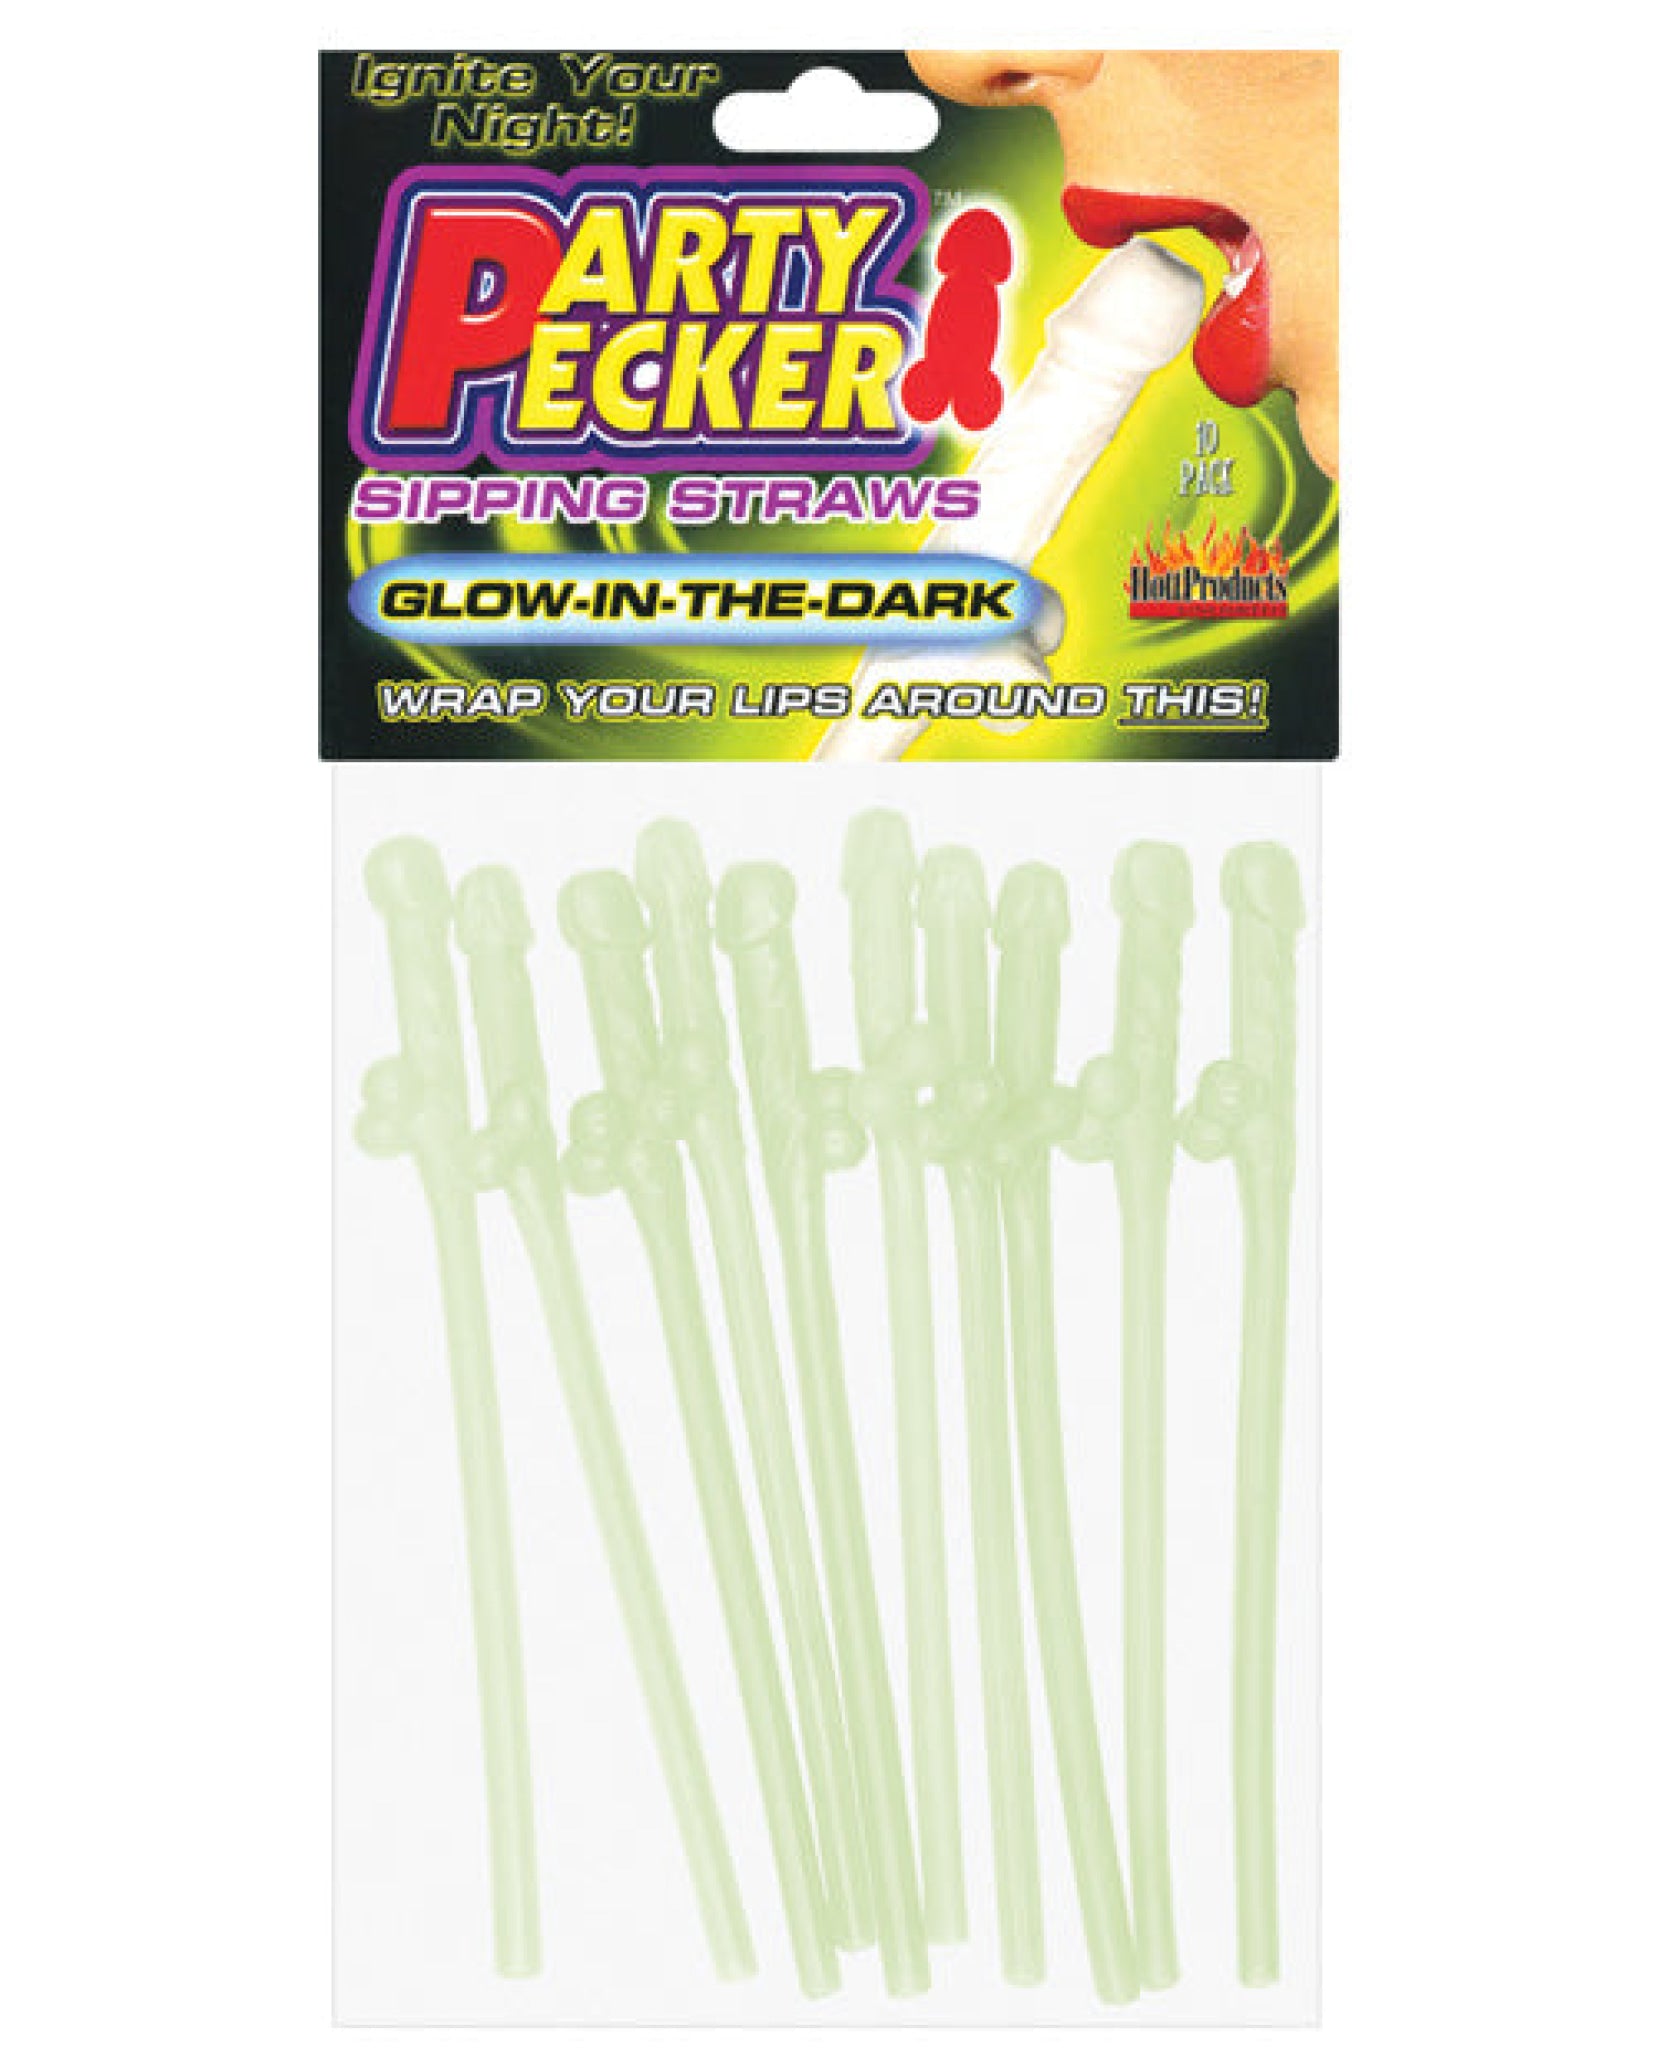 Bachelorette Party Pecker Sipping Straws -Pack Of 10 Hott Products